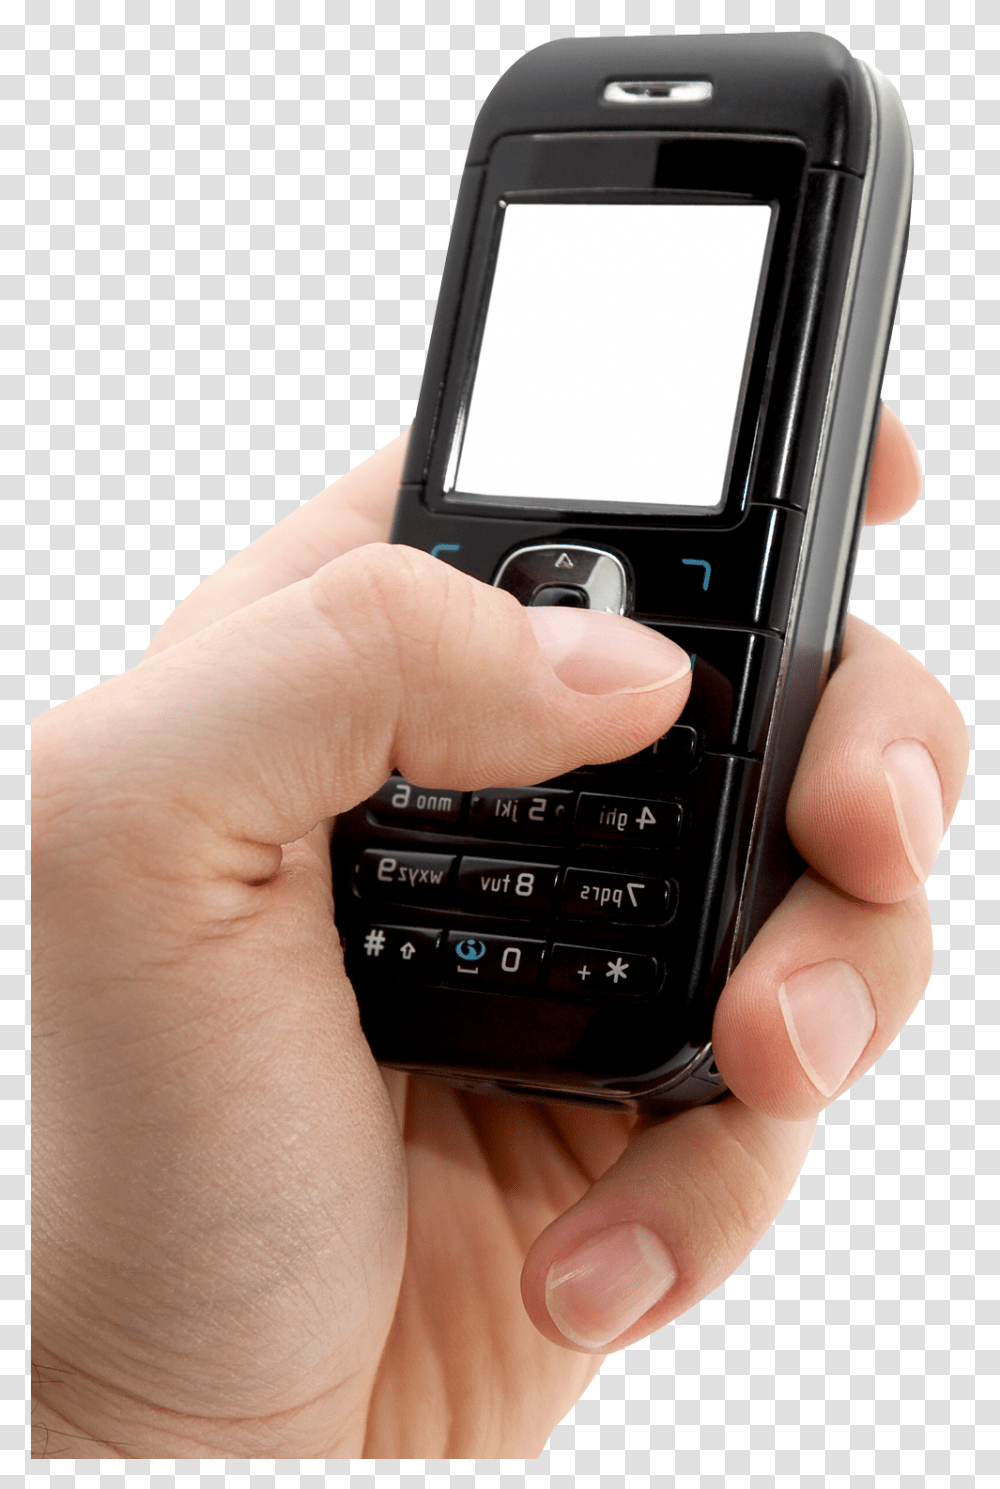 Phone In Hand Image Mobile, Mobile Phone, Electronics, Cell Phone, Person Transparent Png